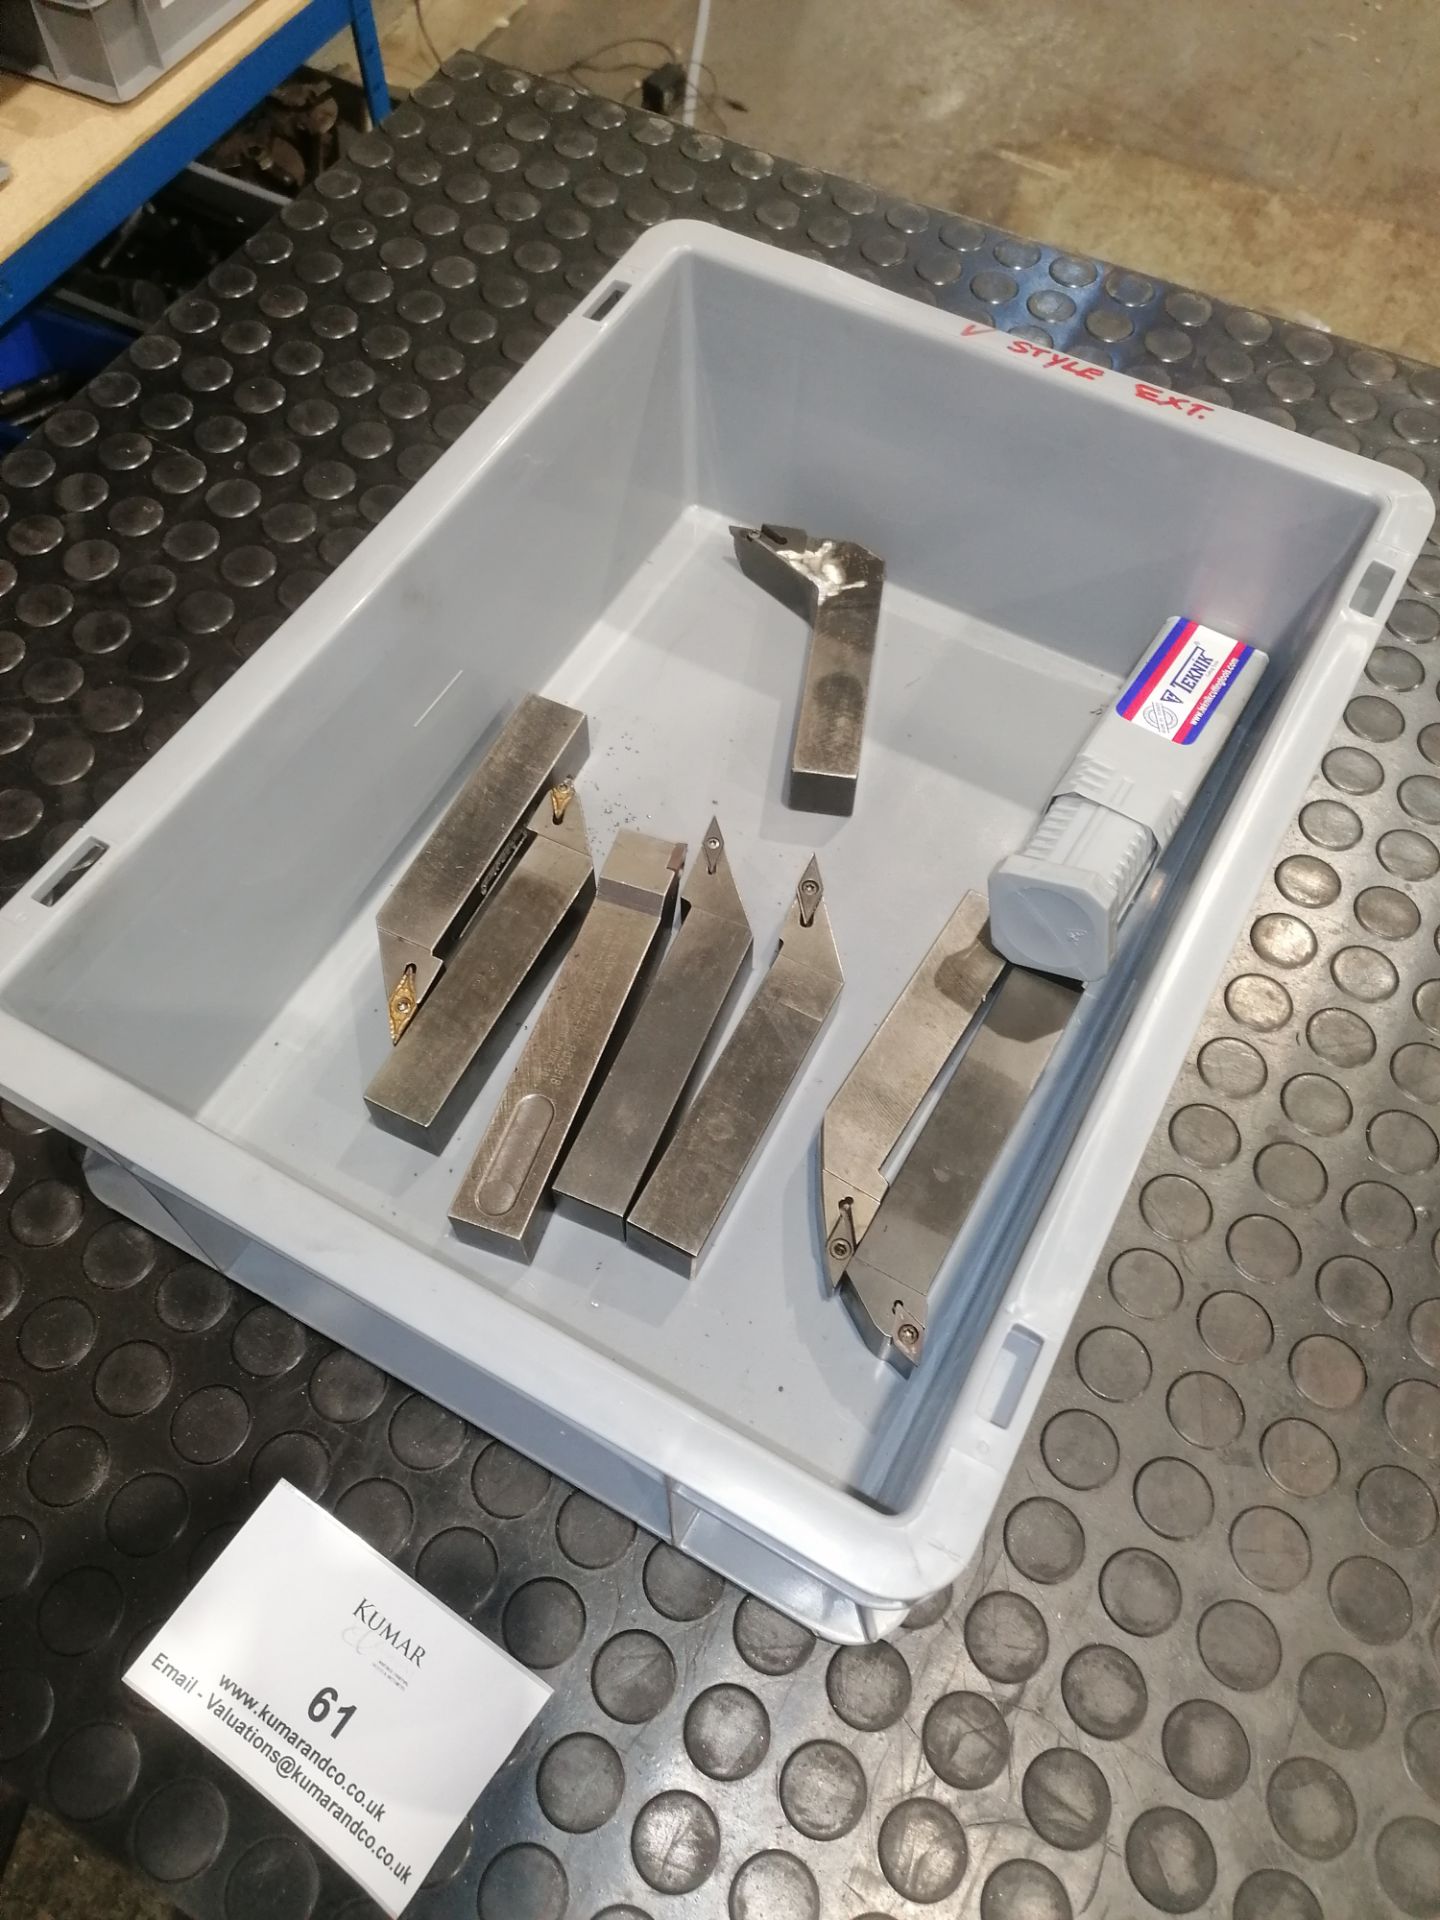 V Style Tooling Tools (Various Sizes) (Please Note: Plastic Container Boxes Are Not Included) - Image 5 of 5